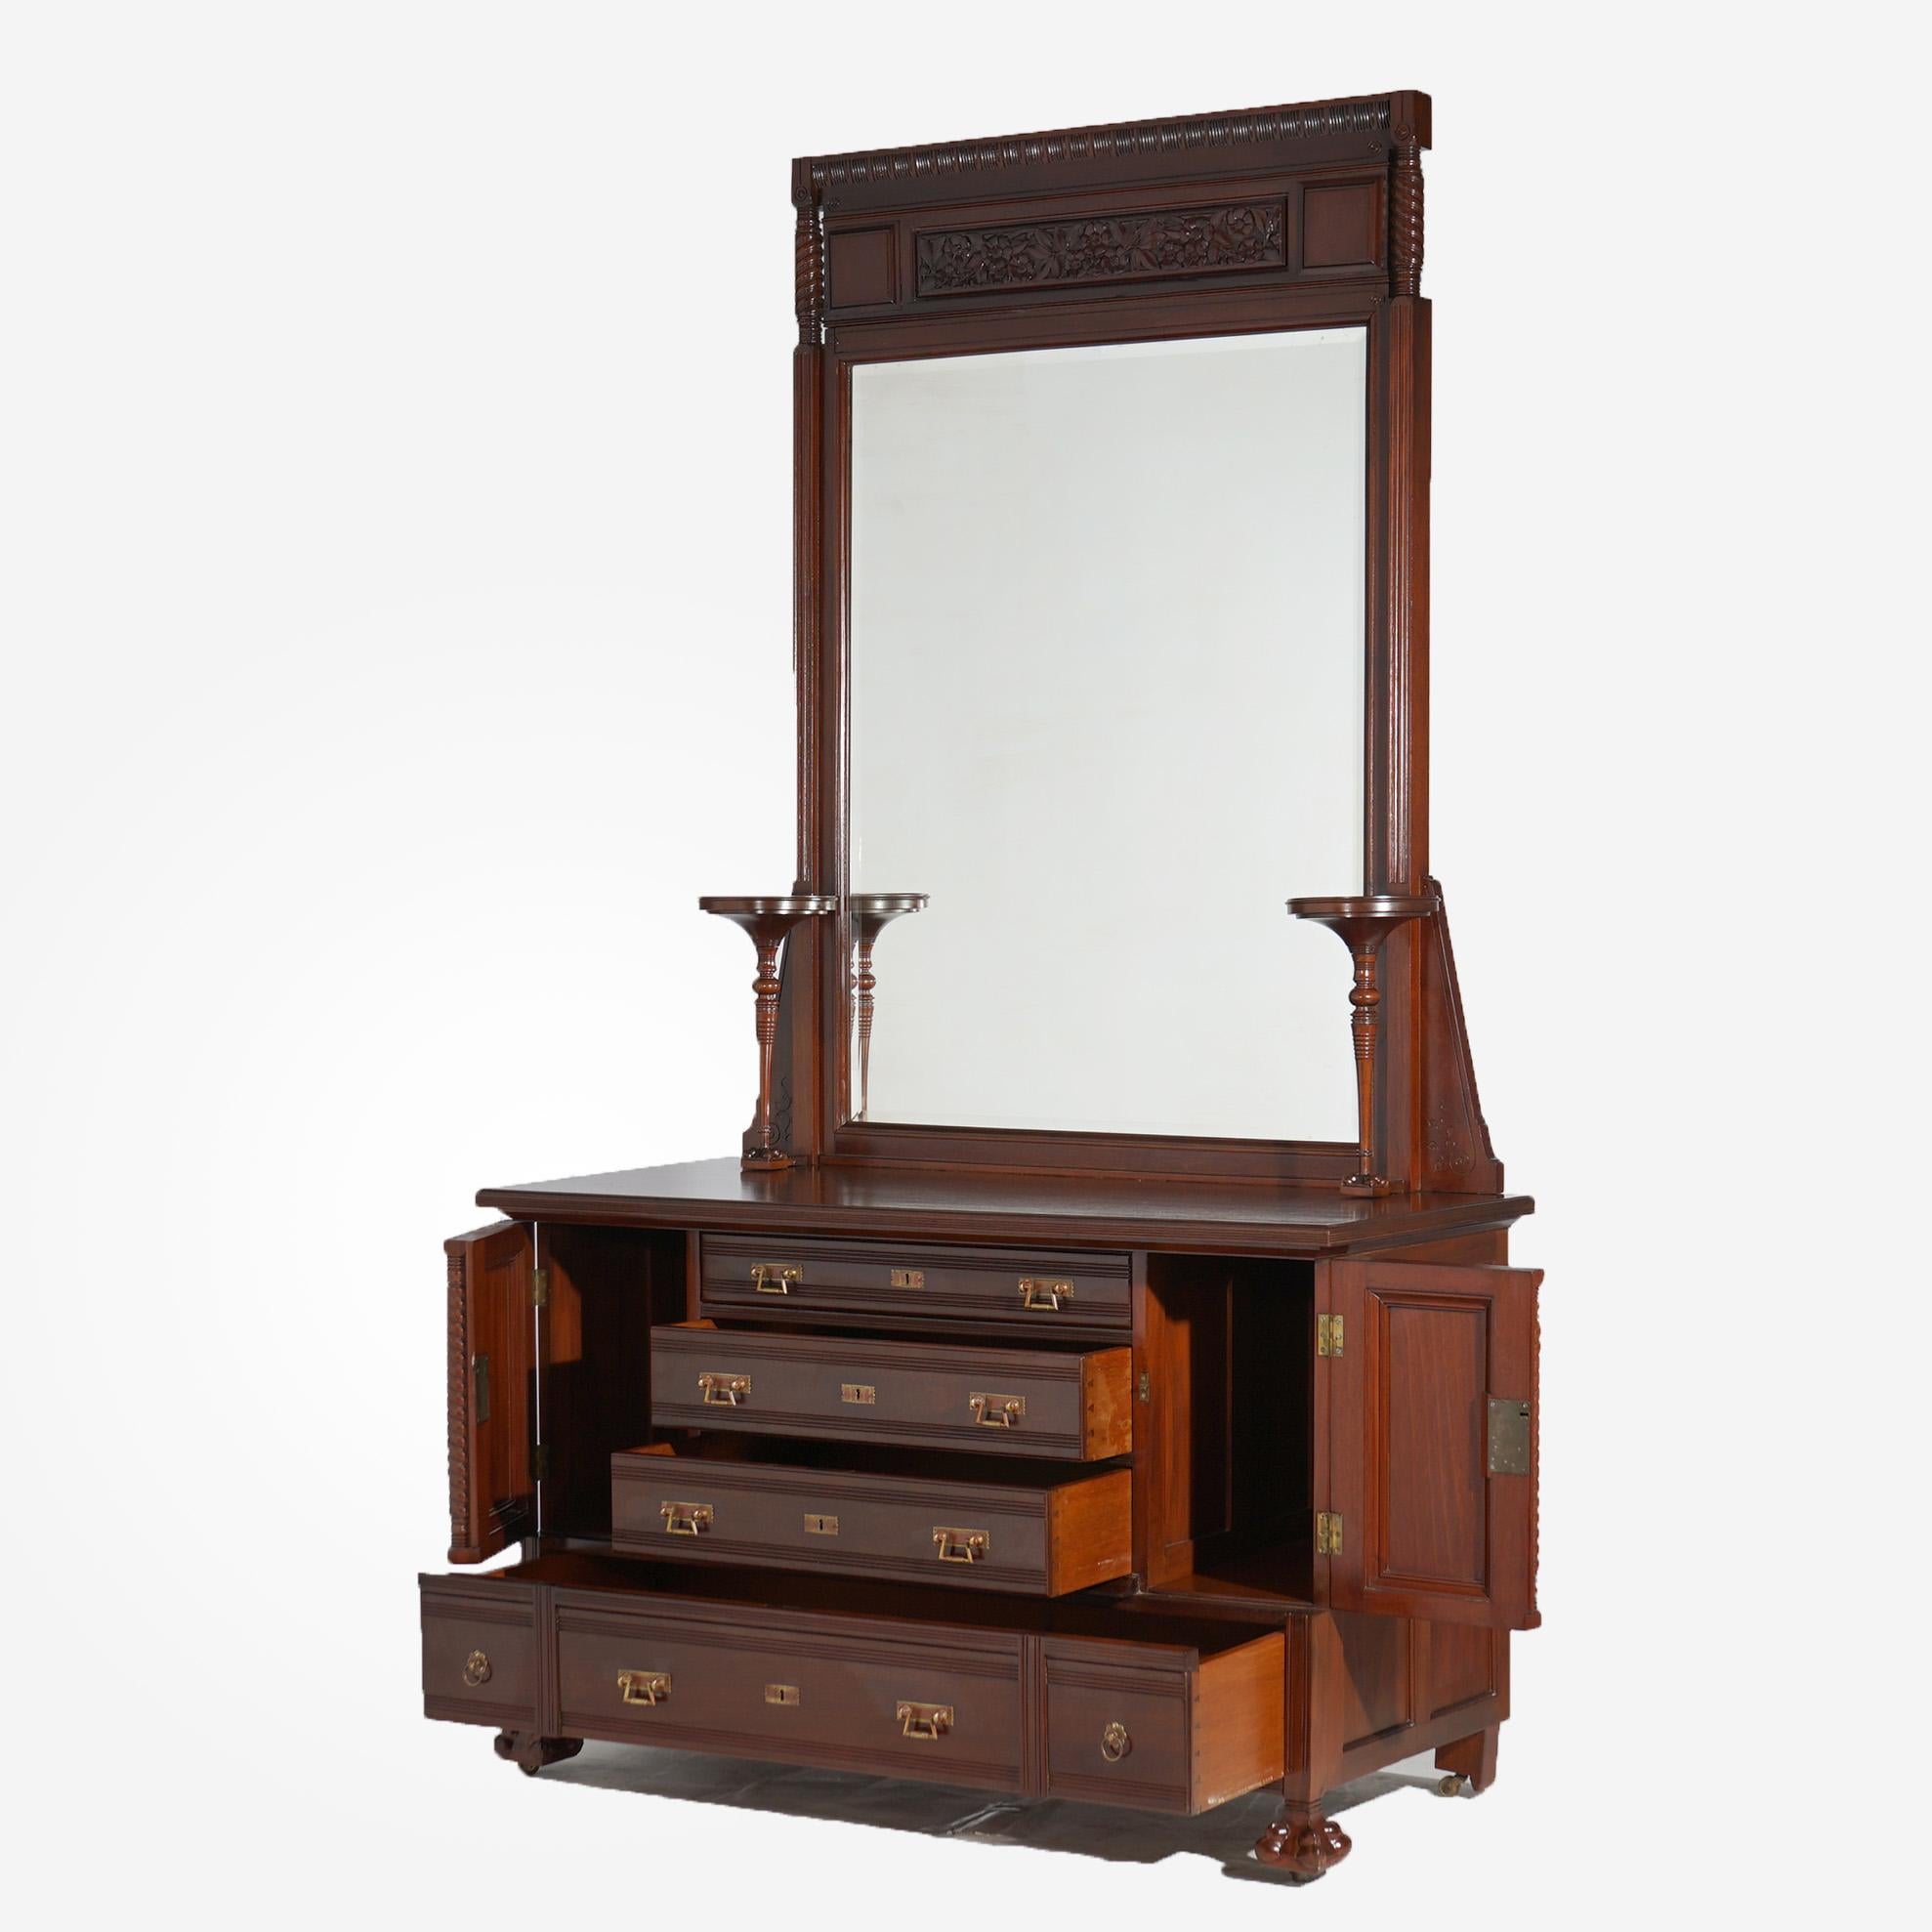 Aesthetic Movement Antique Aesthetic Carved Mahogany Dresser with Mirror, circa 1890